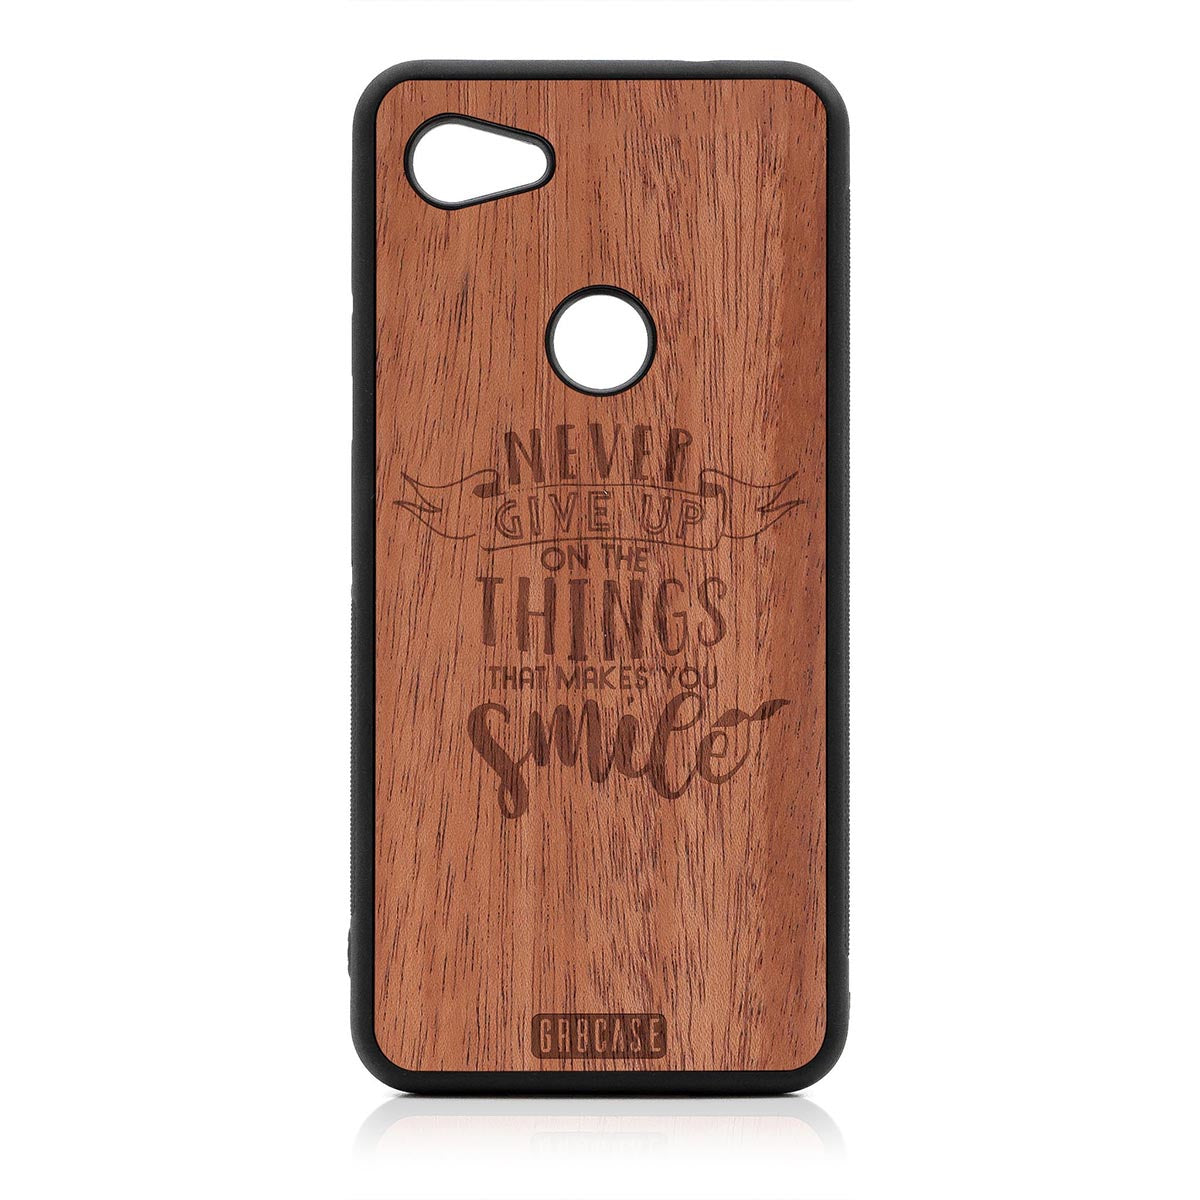 Never Give Up On The Things That Makes You Smile Design Wood Case Google Pixel 3A by GR8CASE